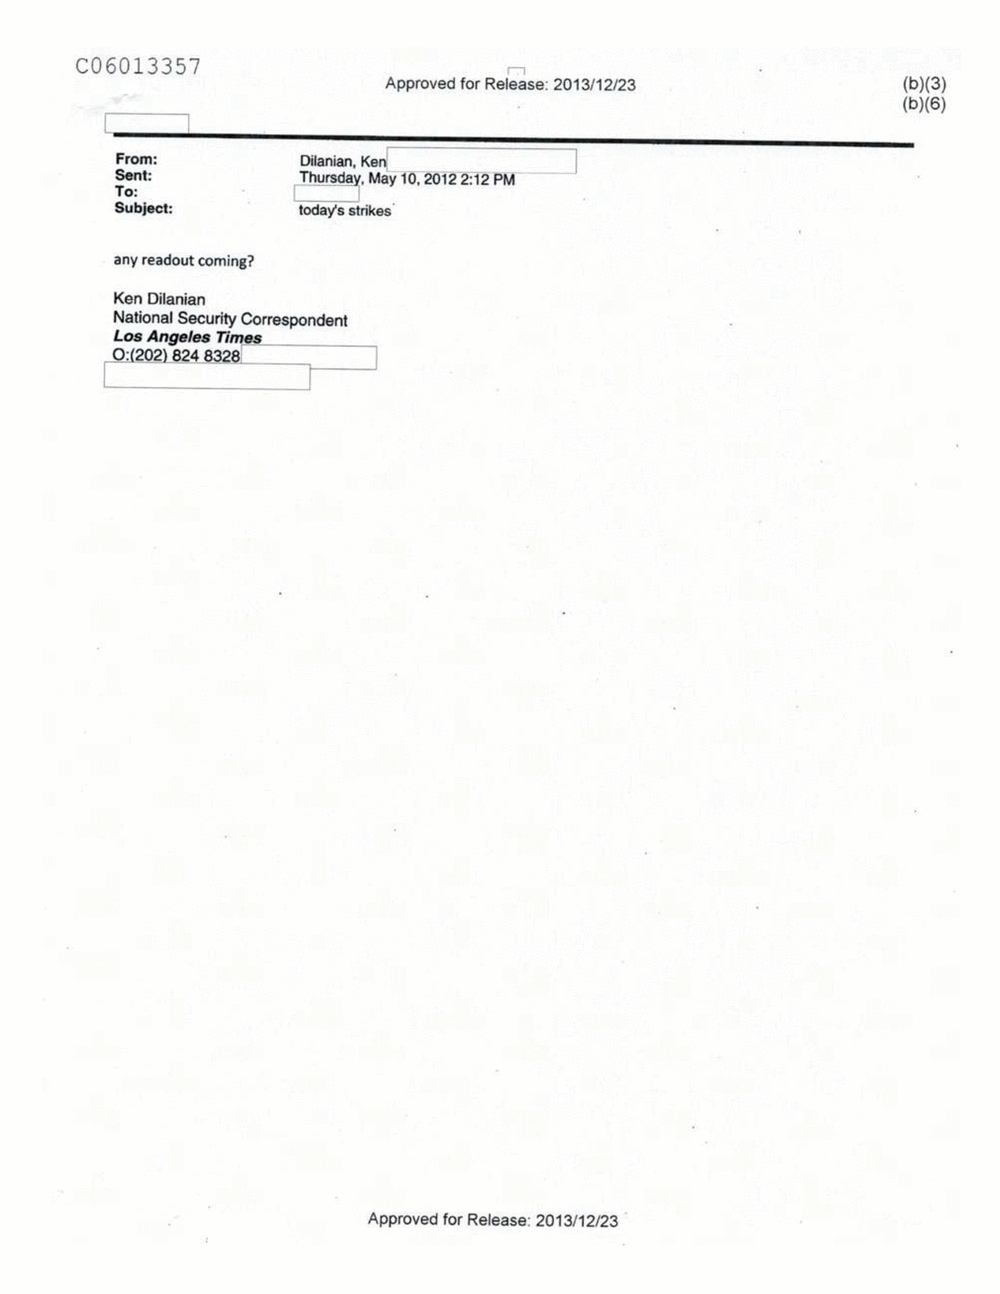 Page 277 from Email Correspondence Between Reporters and CIA Flacks